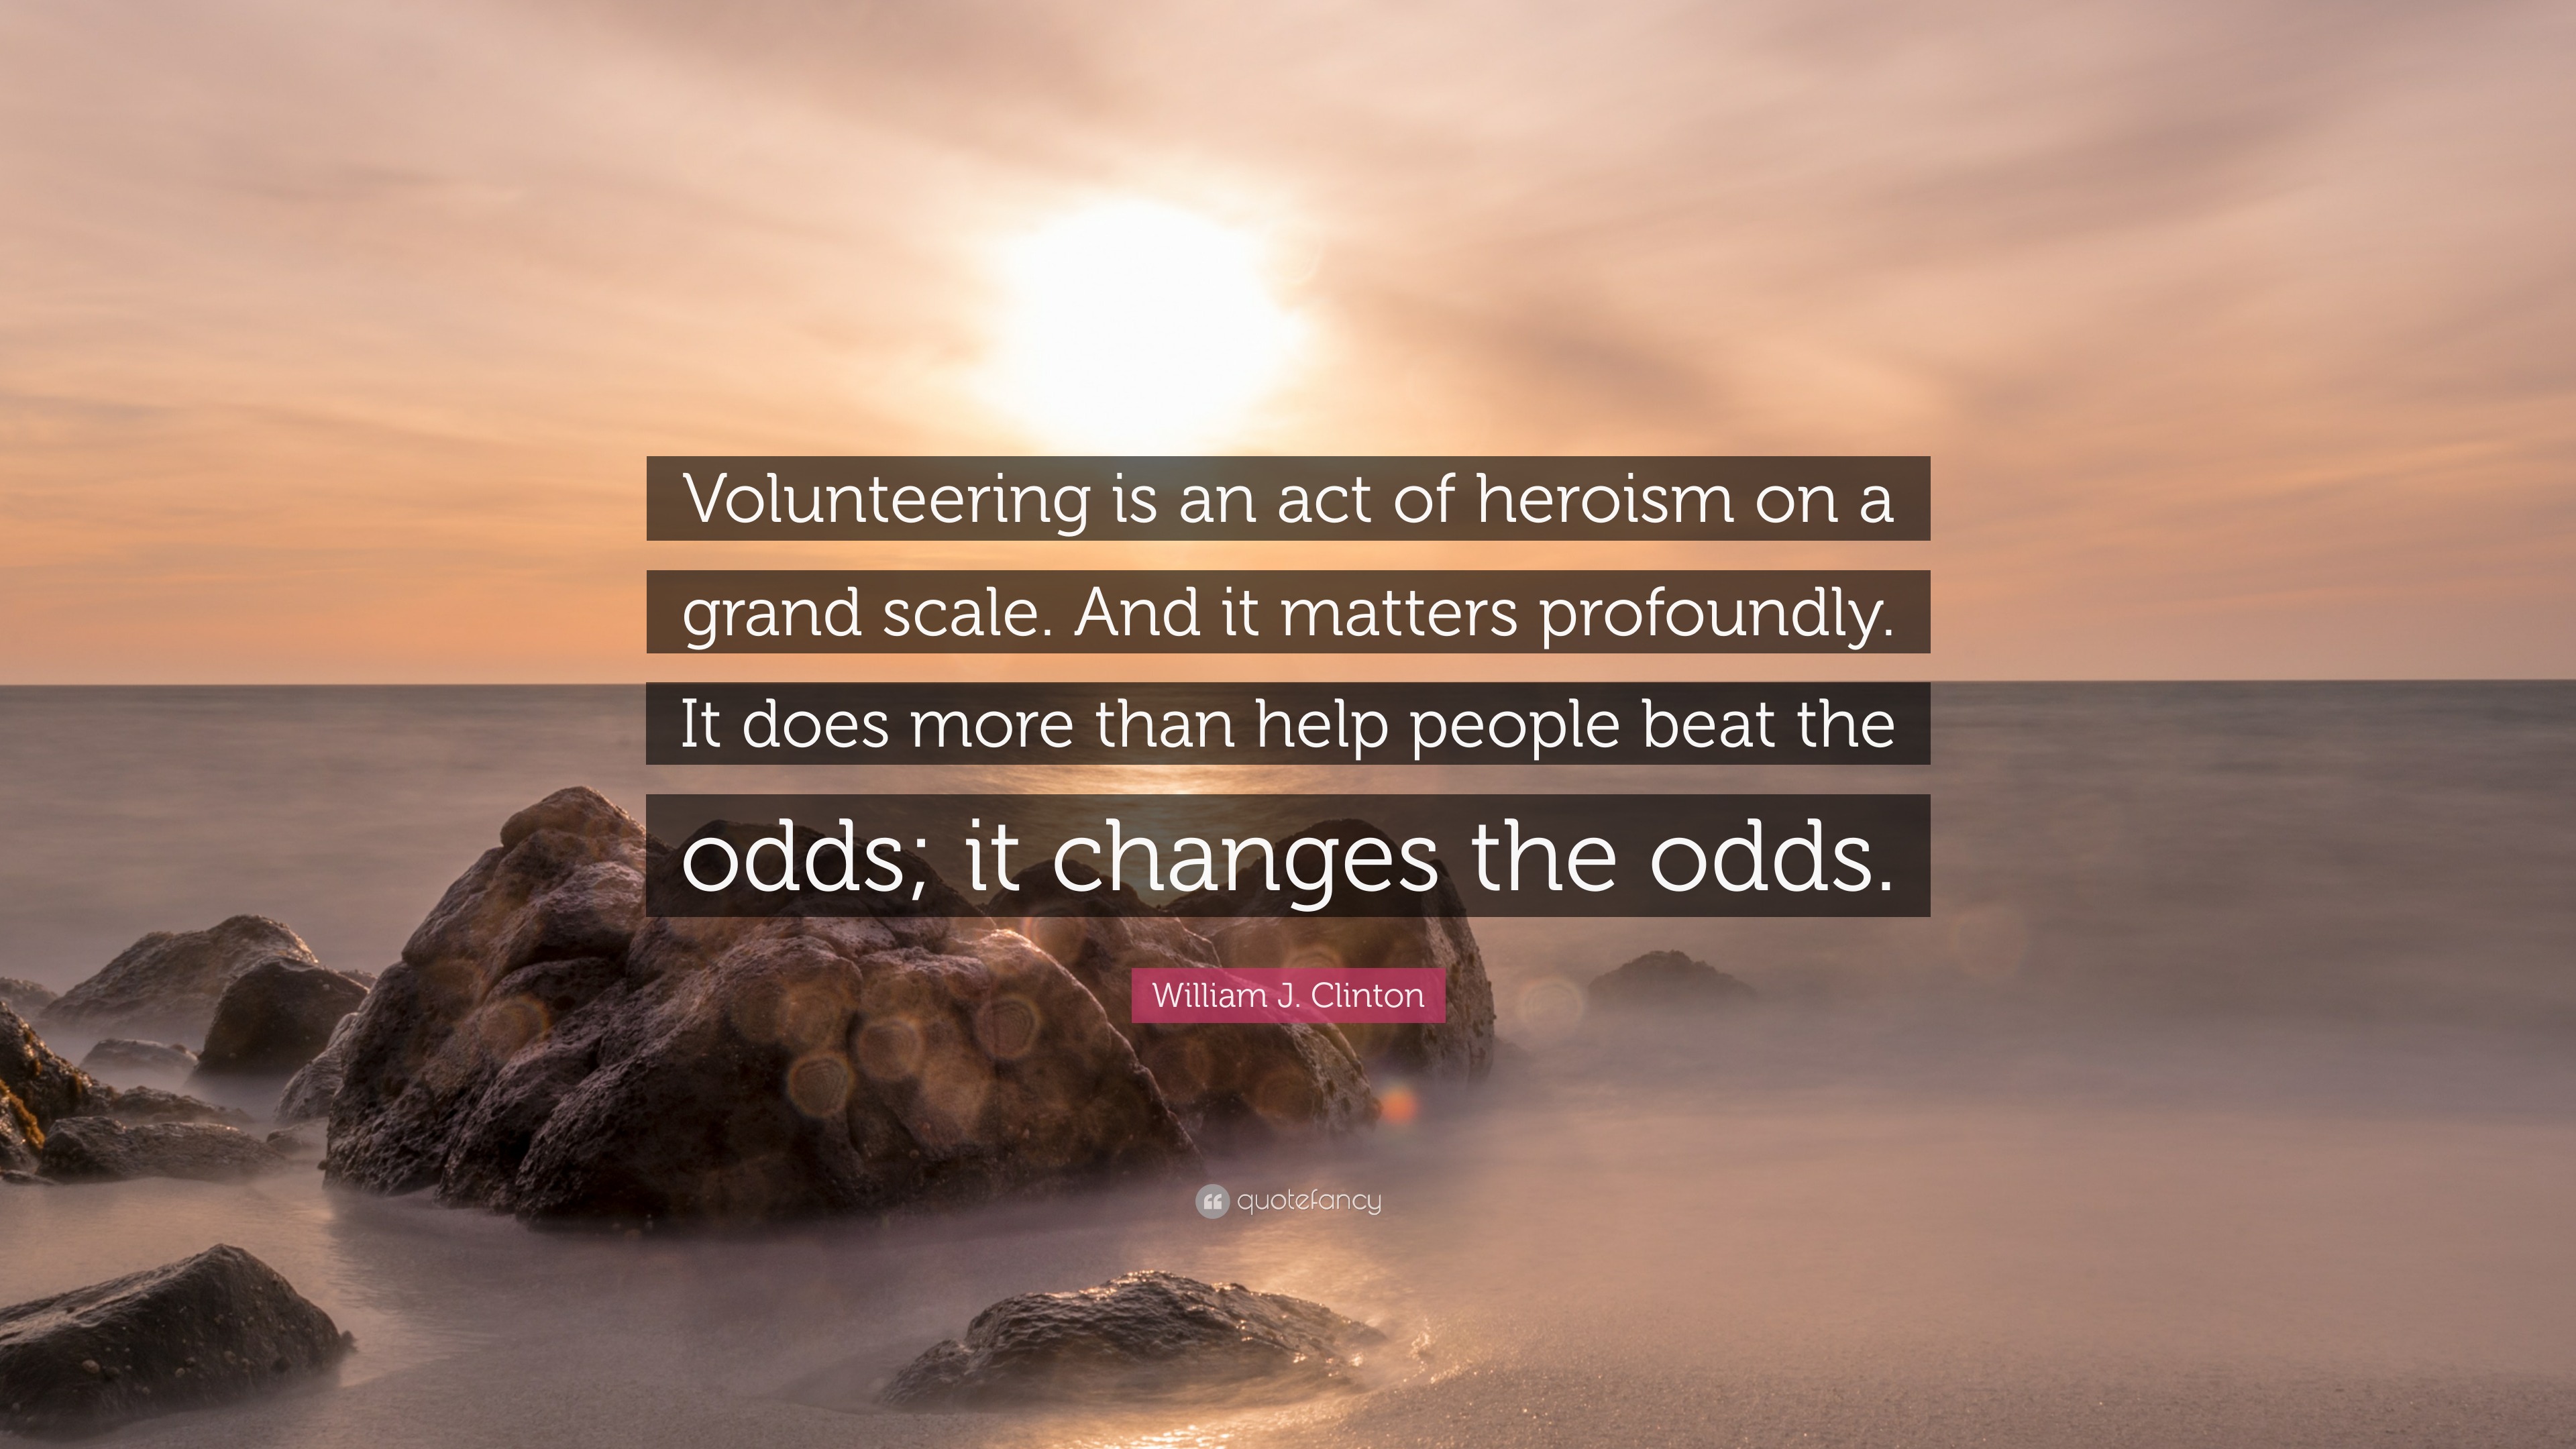 William J. Clinton Quote: “Volunteering is an act of heroism on a scale. And it matters profoundly. It does more than help people beat the od...”